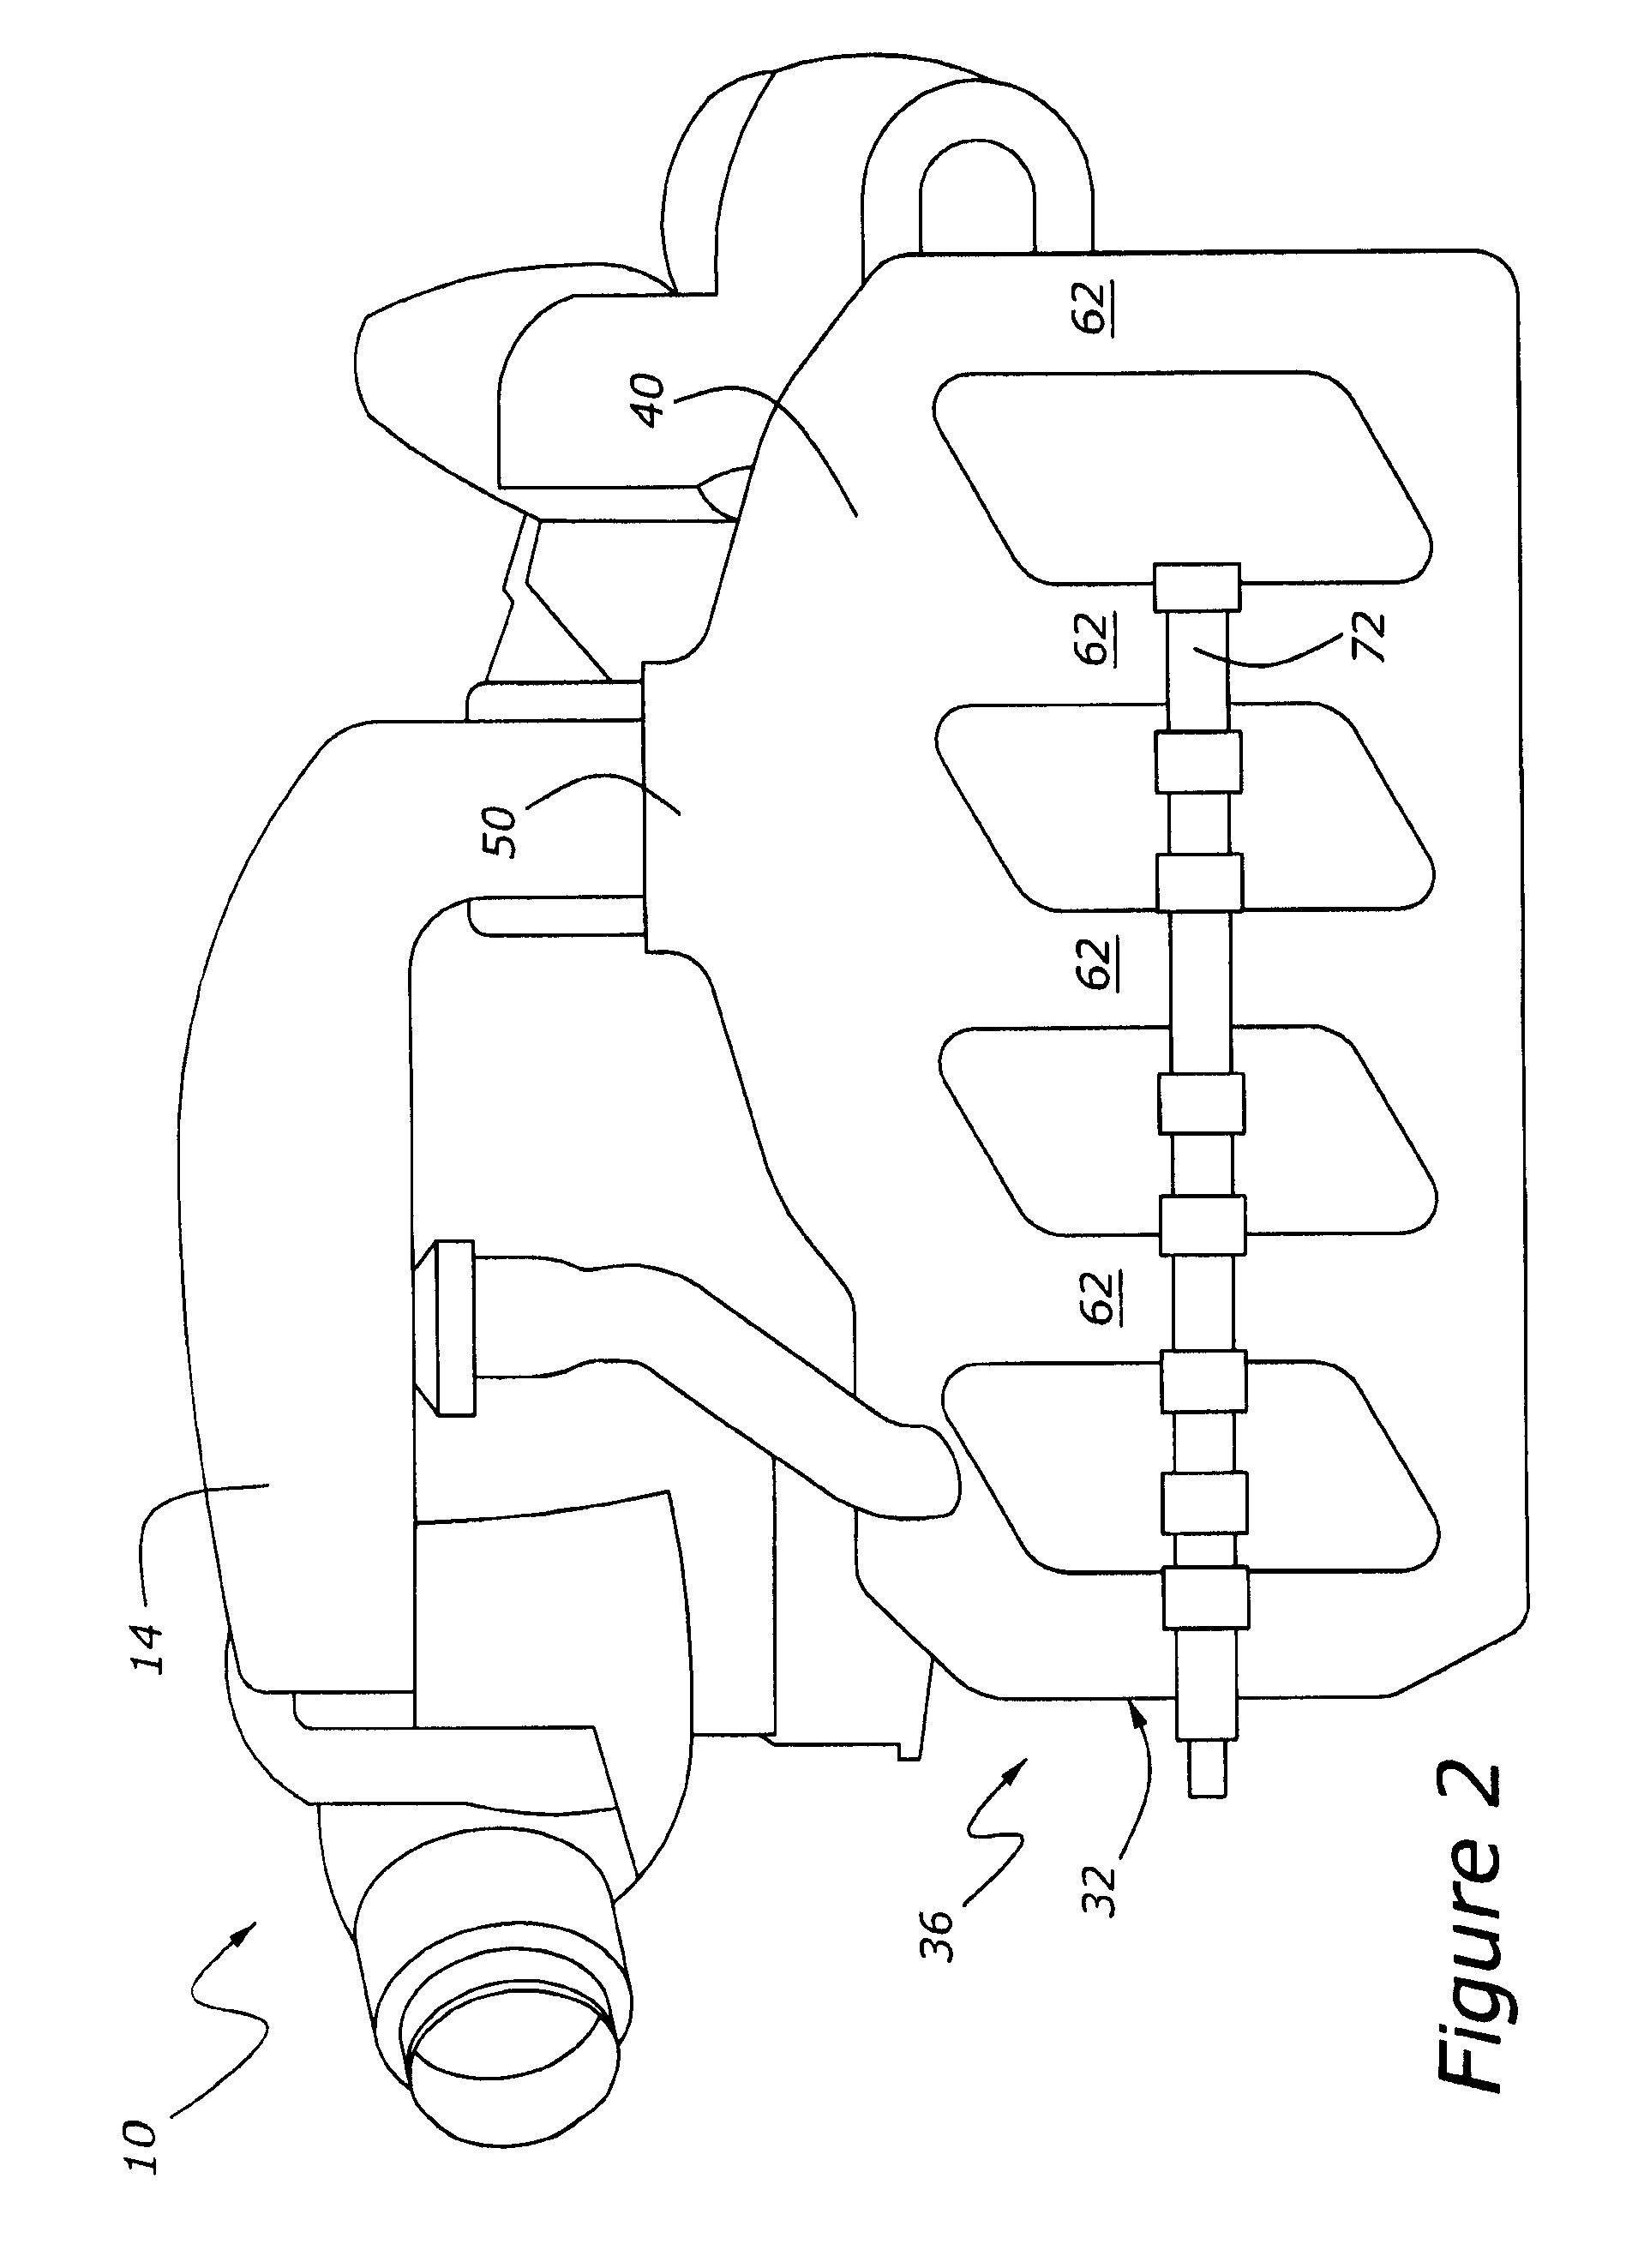 Induction system for internal combustion engine